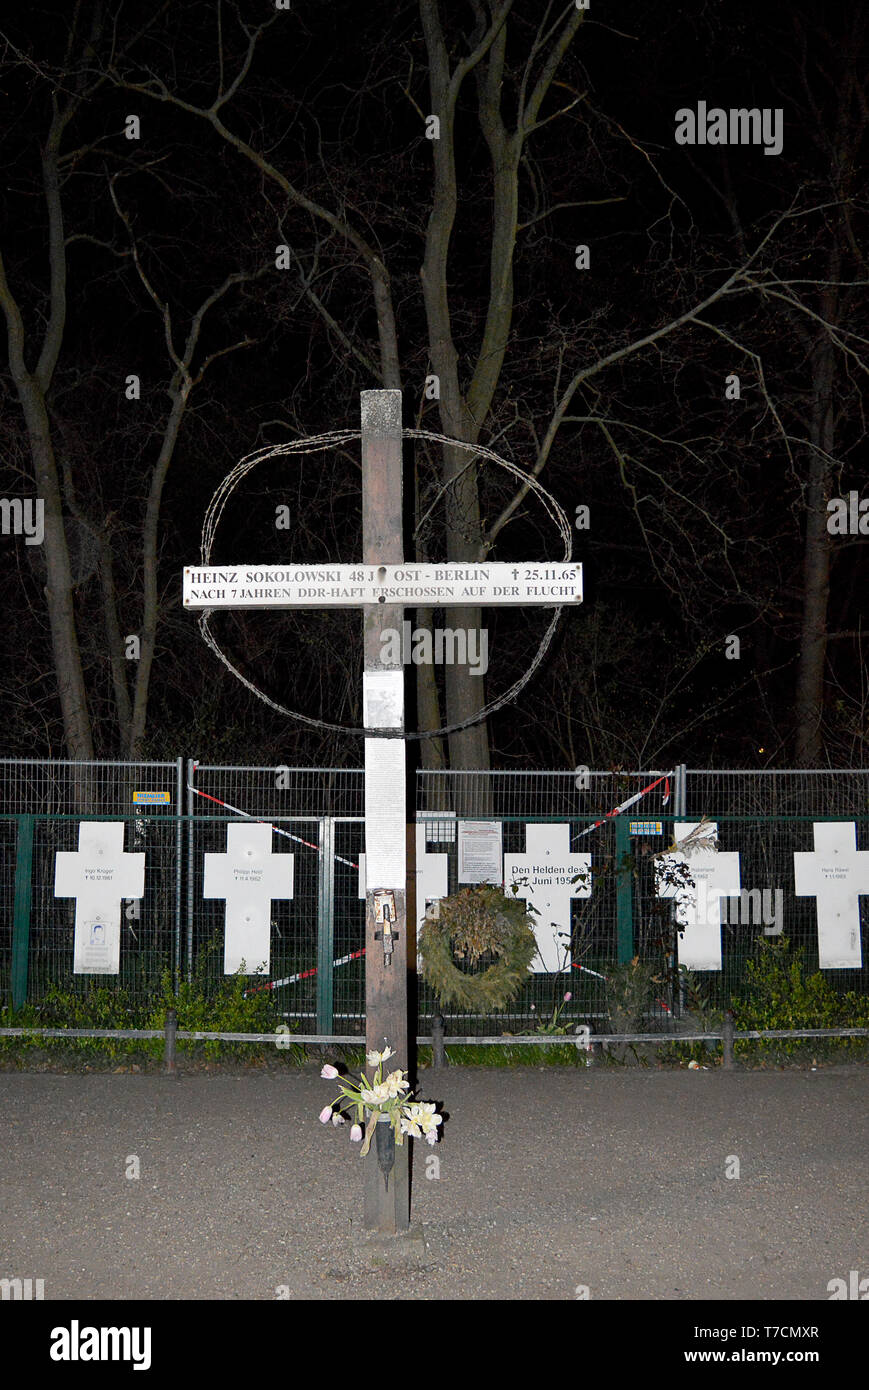 BERLIN, GERMANY - 2 APRIL 2019: A cross commemorating Heinz Sokolowski, the 64th known person to be murdered trying to cross to the west. Stock Photo